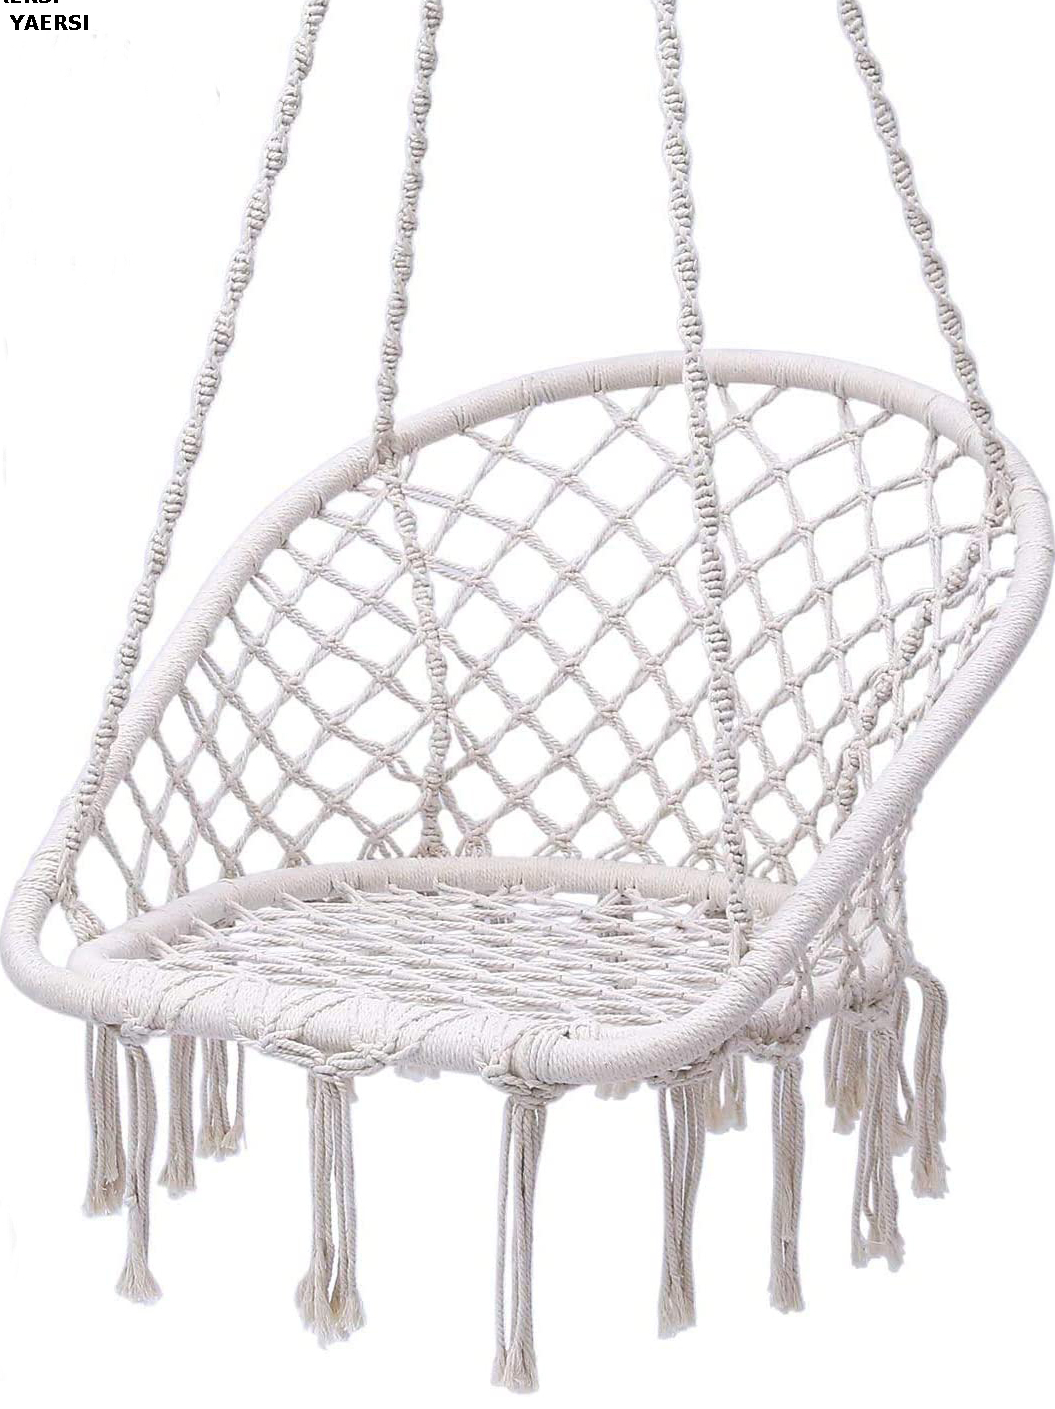 Macrame Hammock Chair for Inddor And Outdoor